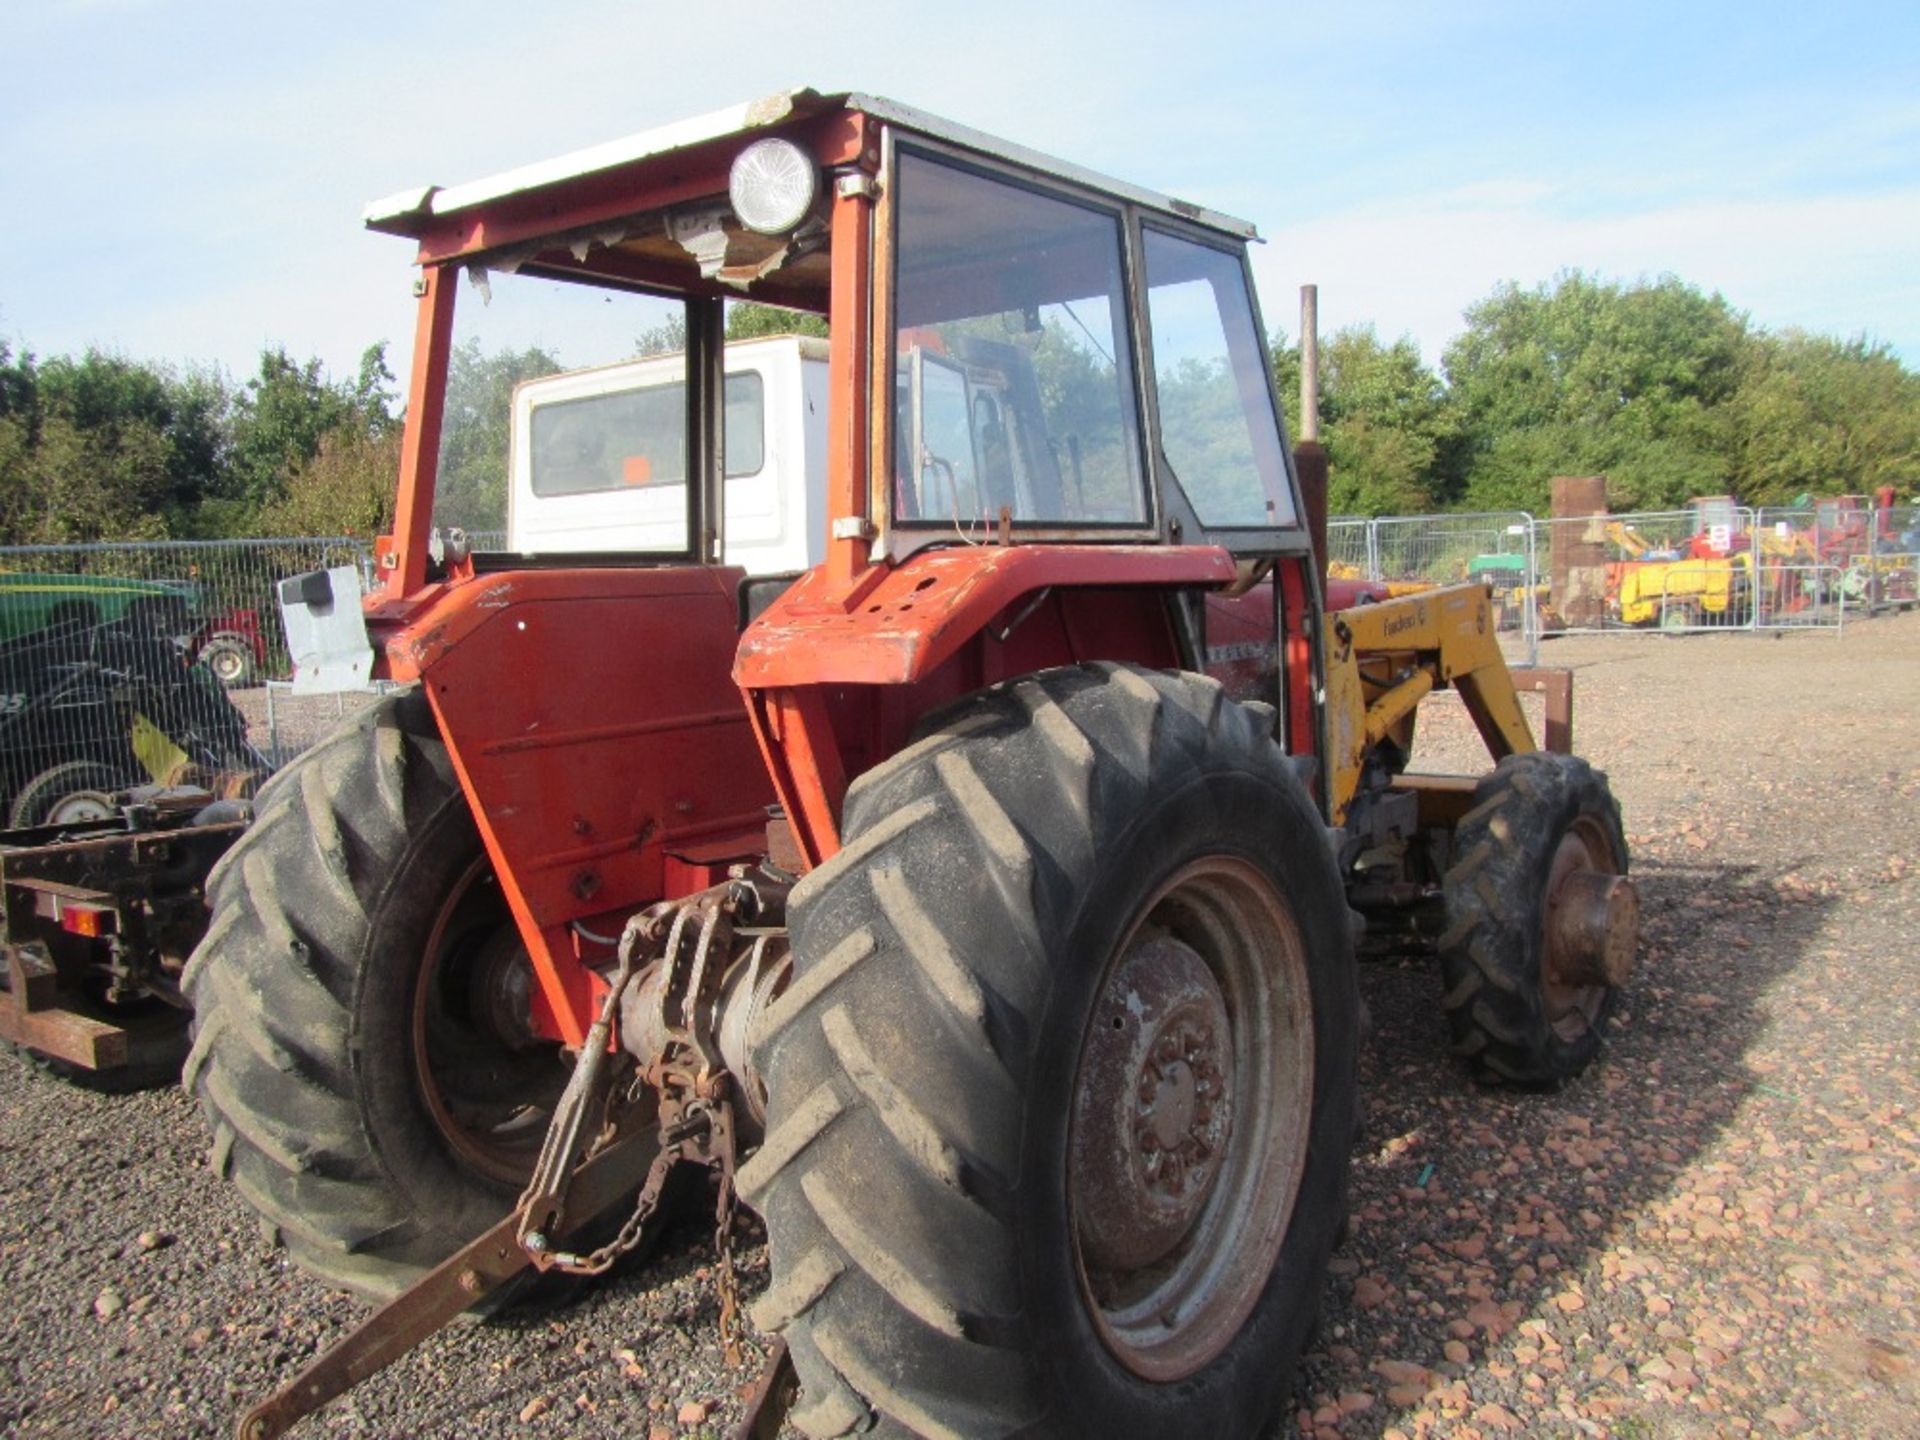 Massey Ferguson 168 4wd Tractor with Loader Ser No 2600115 - Image 3 of 6